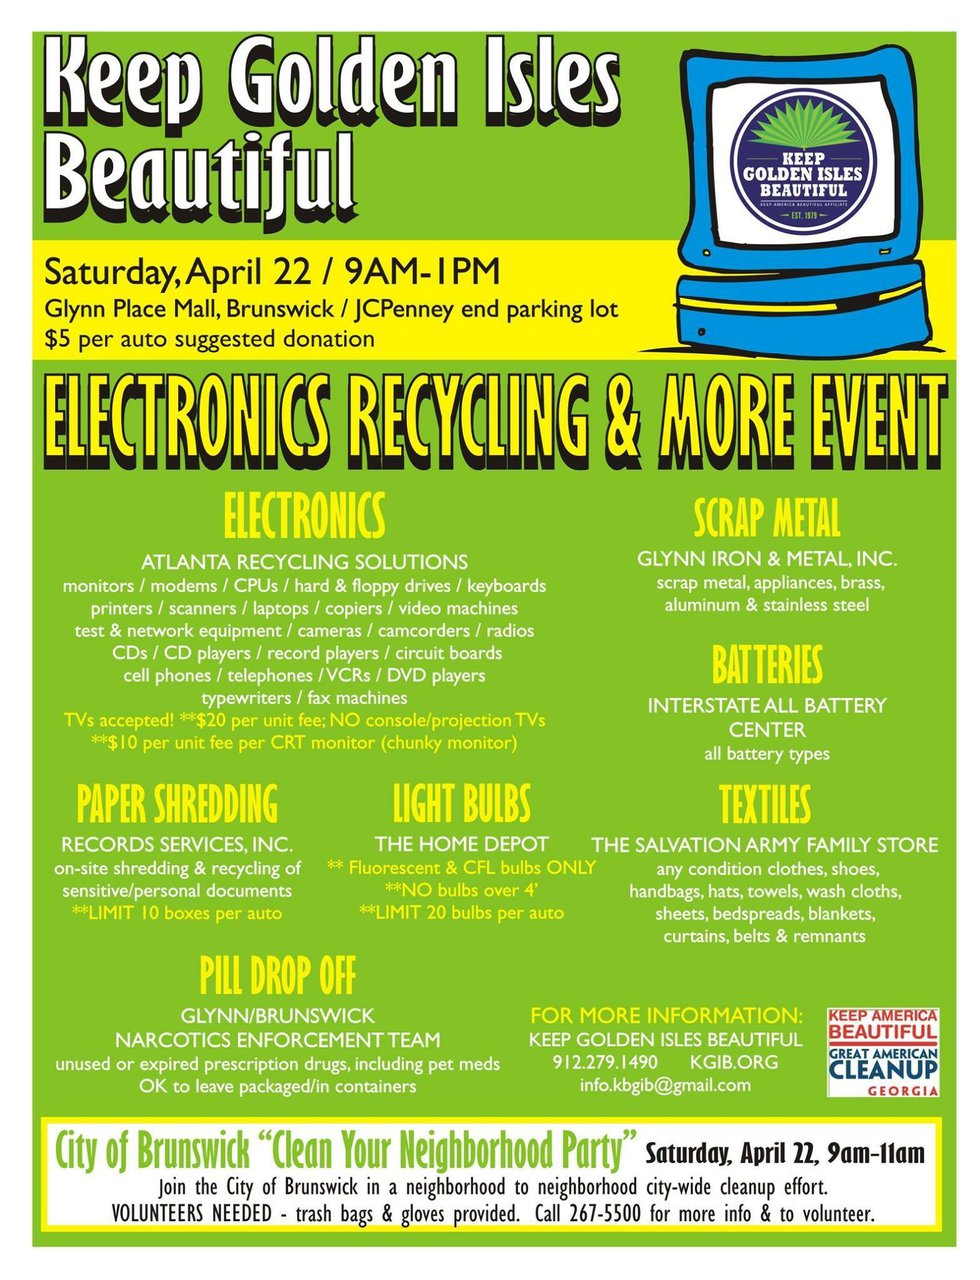 KGIB Electronics Recycling &amp; More